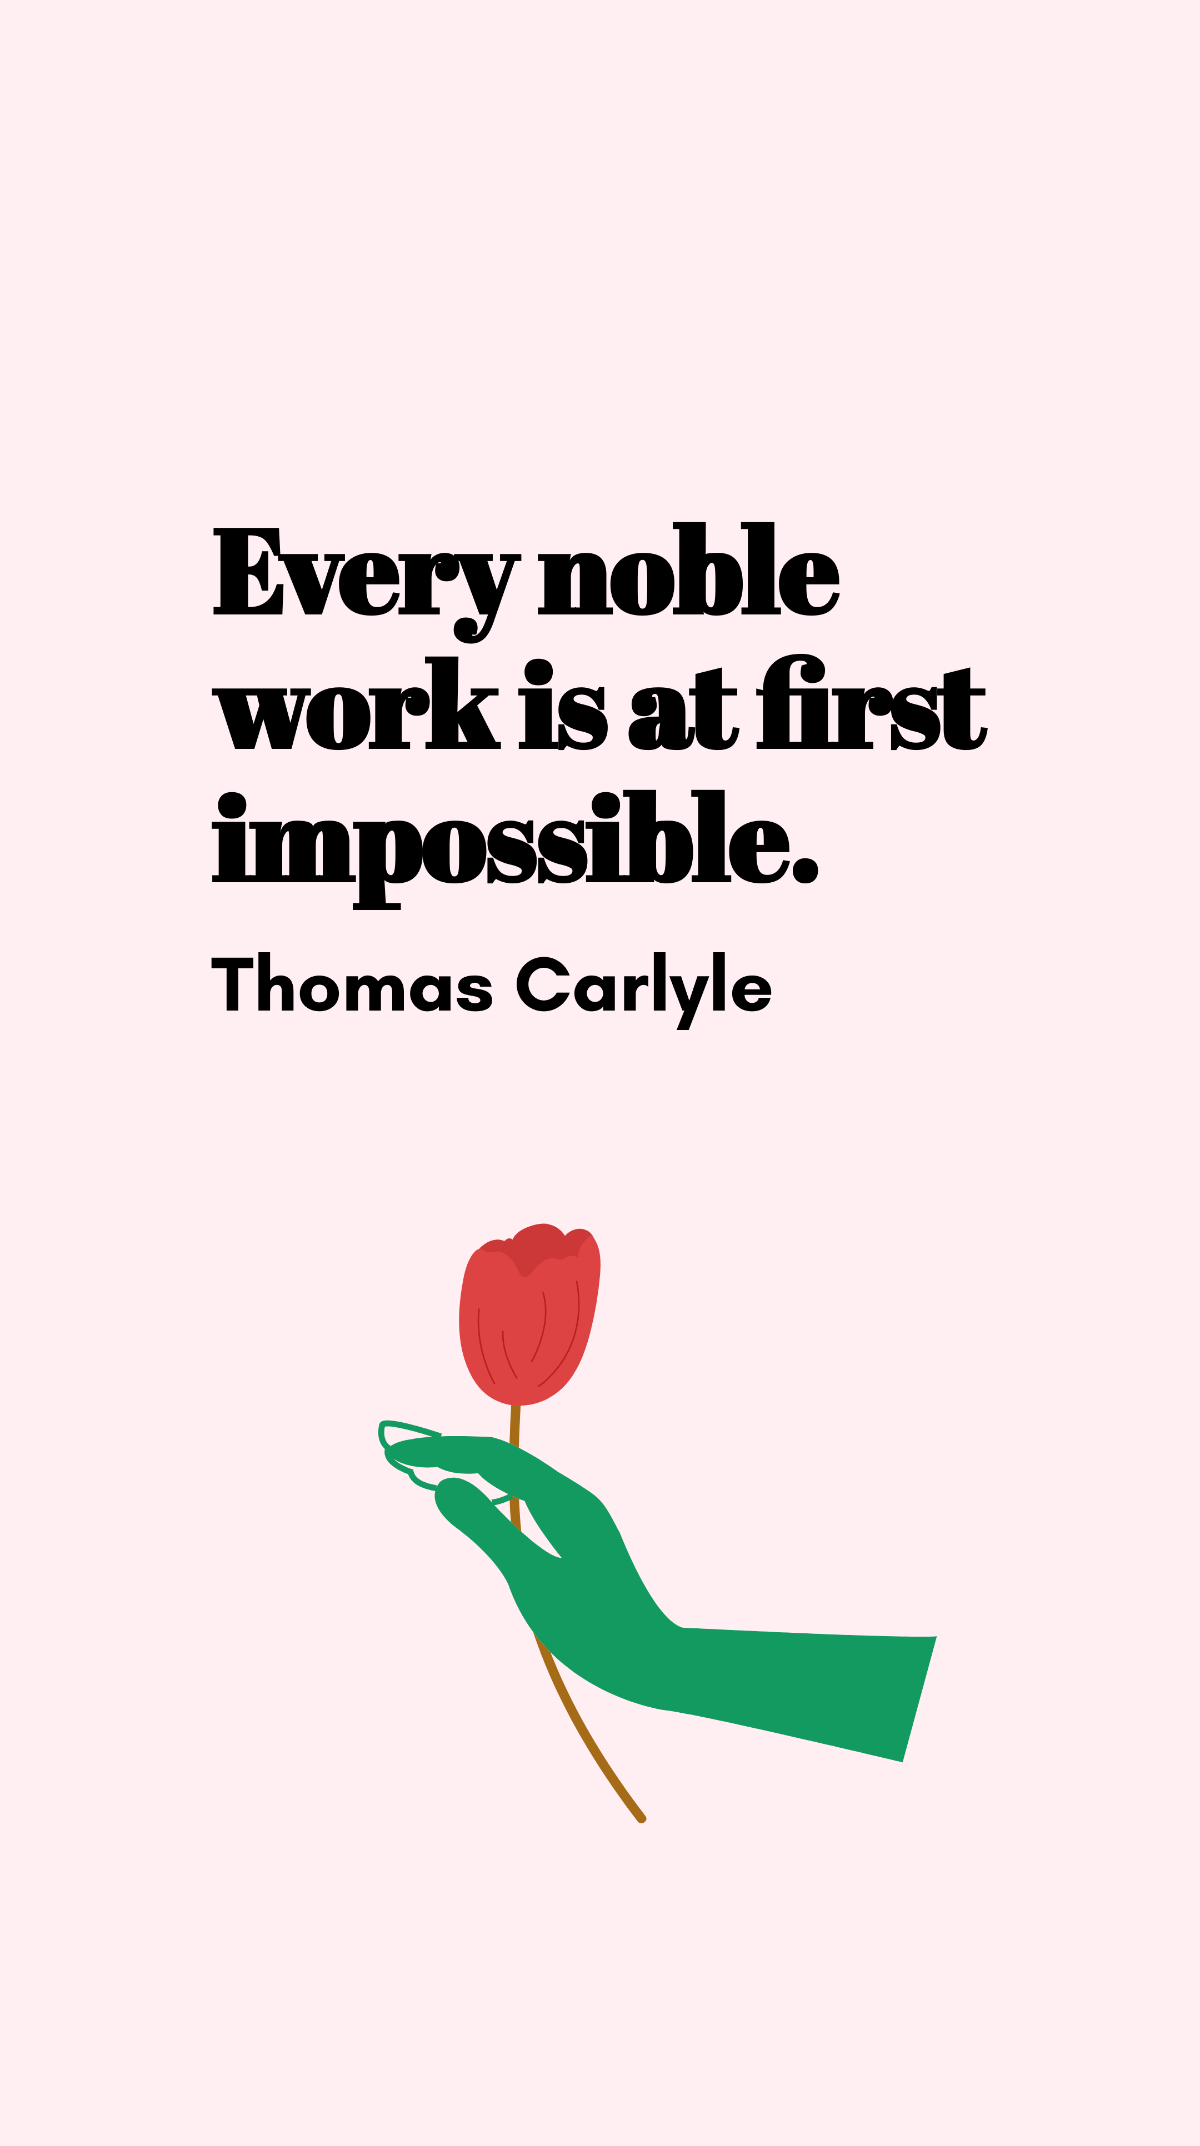 Thomas Carlyle - Every noble work is at first impossible. Template